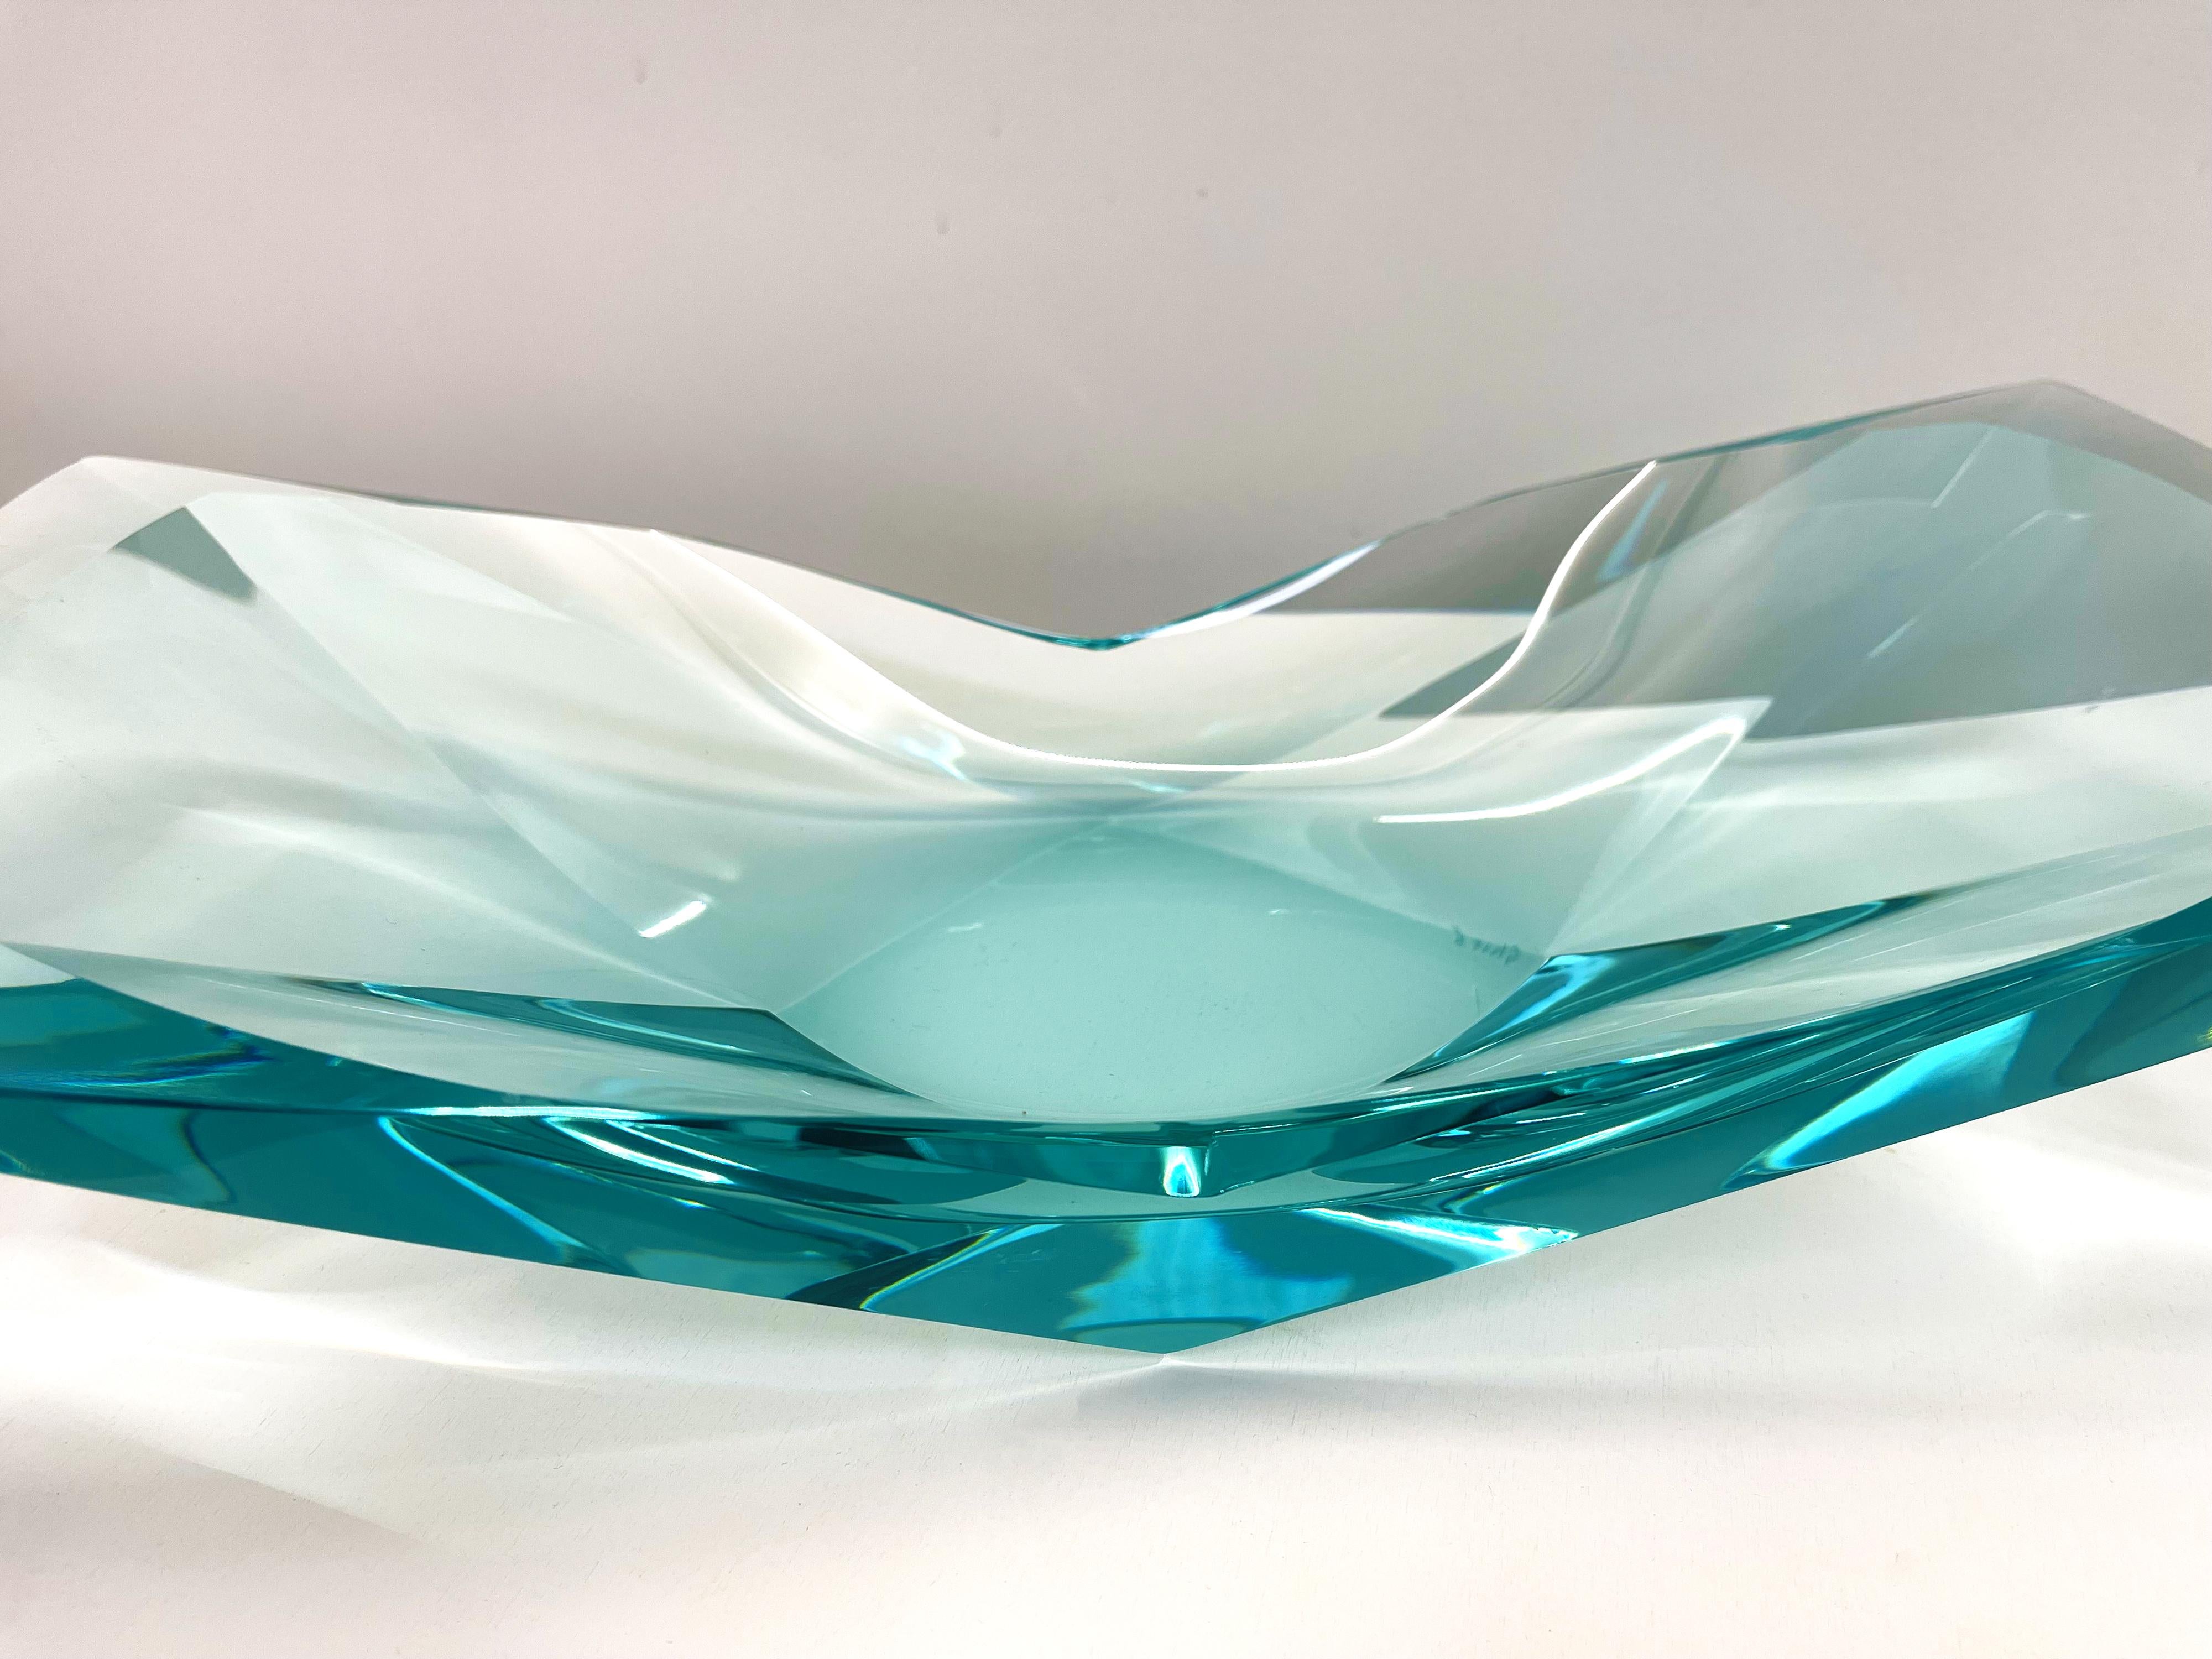 Glass Contemporary 'Papillon' Artistic Crystal Bowl Aquamarine by Ghirò Studio For Sale